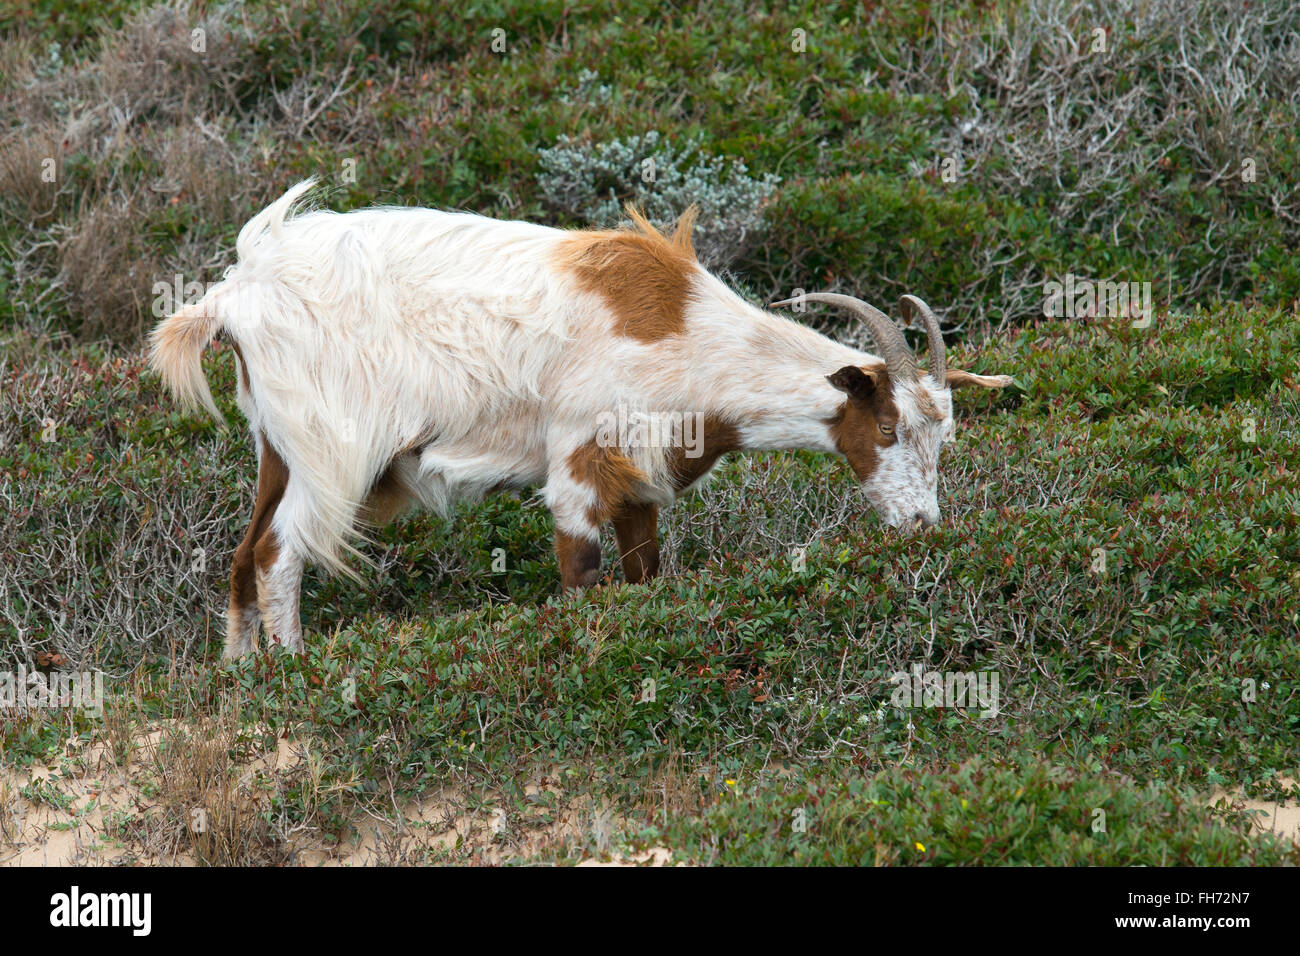 Domestic goat eating small leaves on the beach, Sardinia, Italy Stock Photo